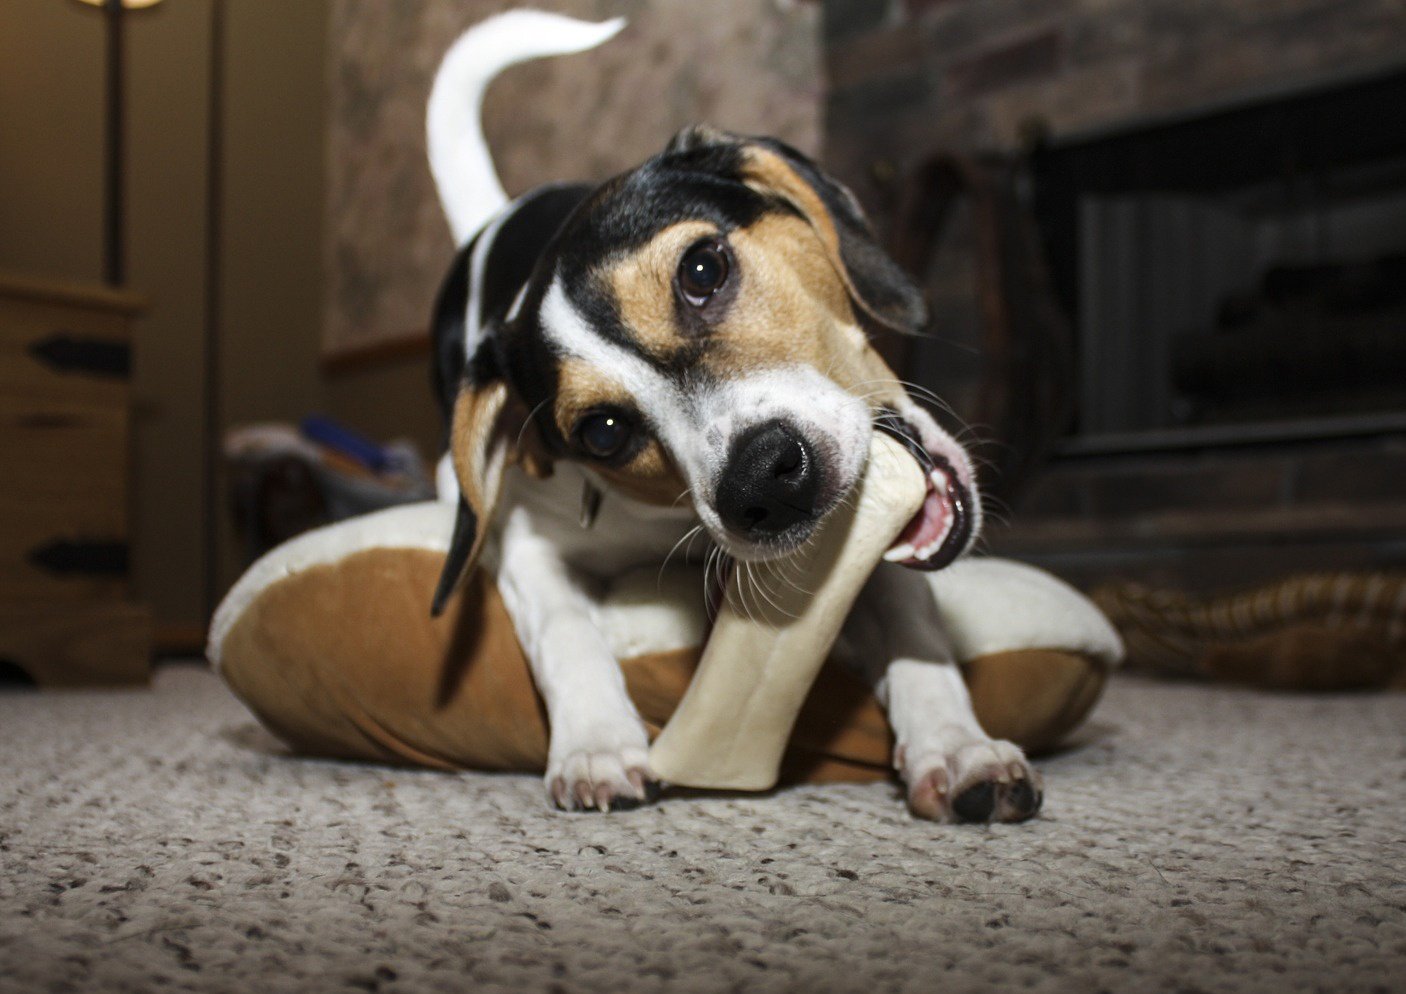 safe chew bones for dogs